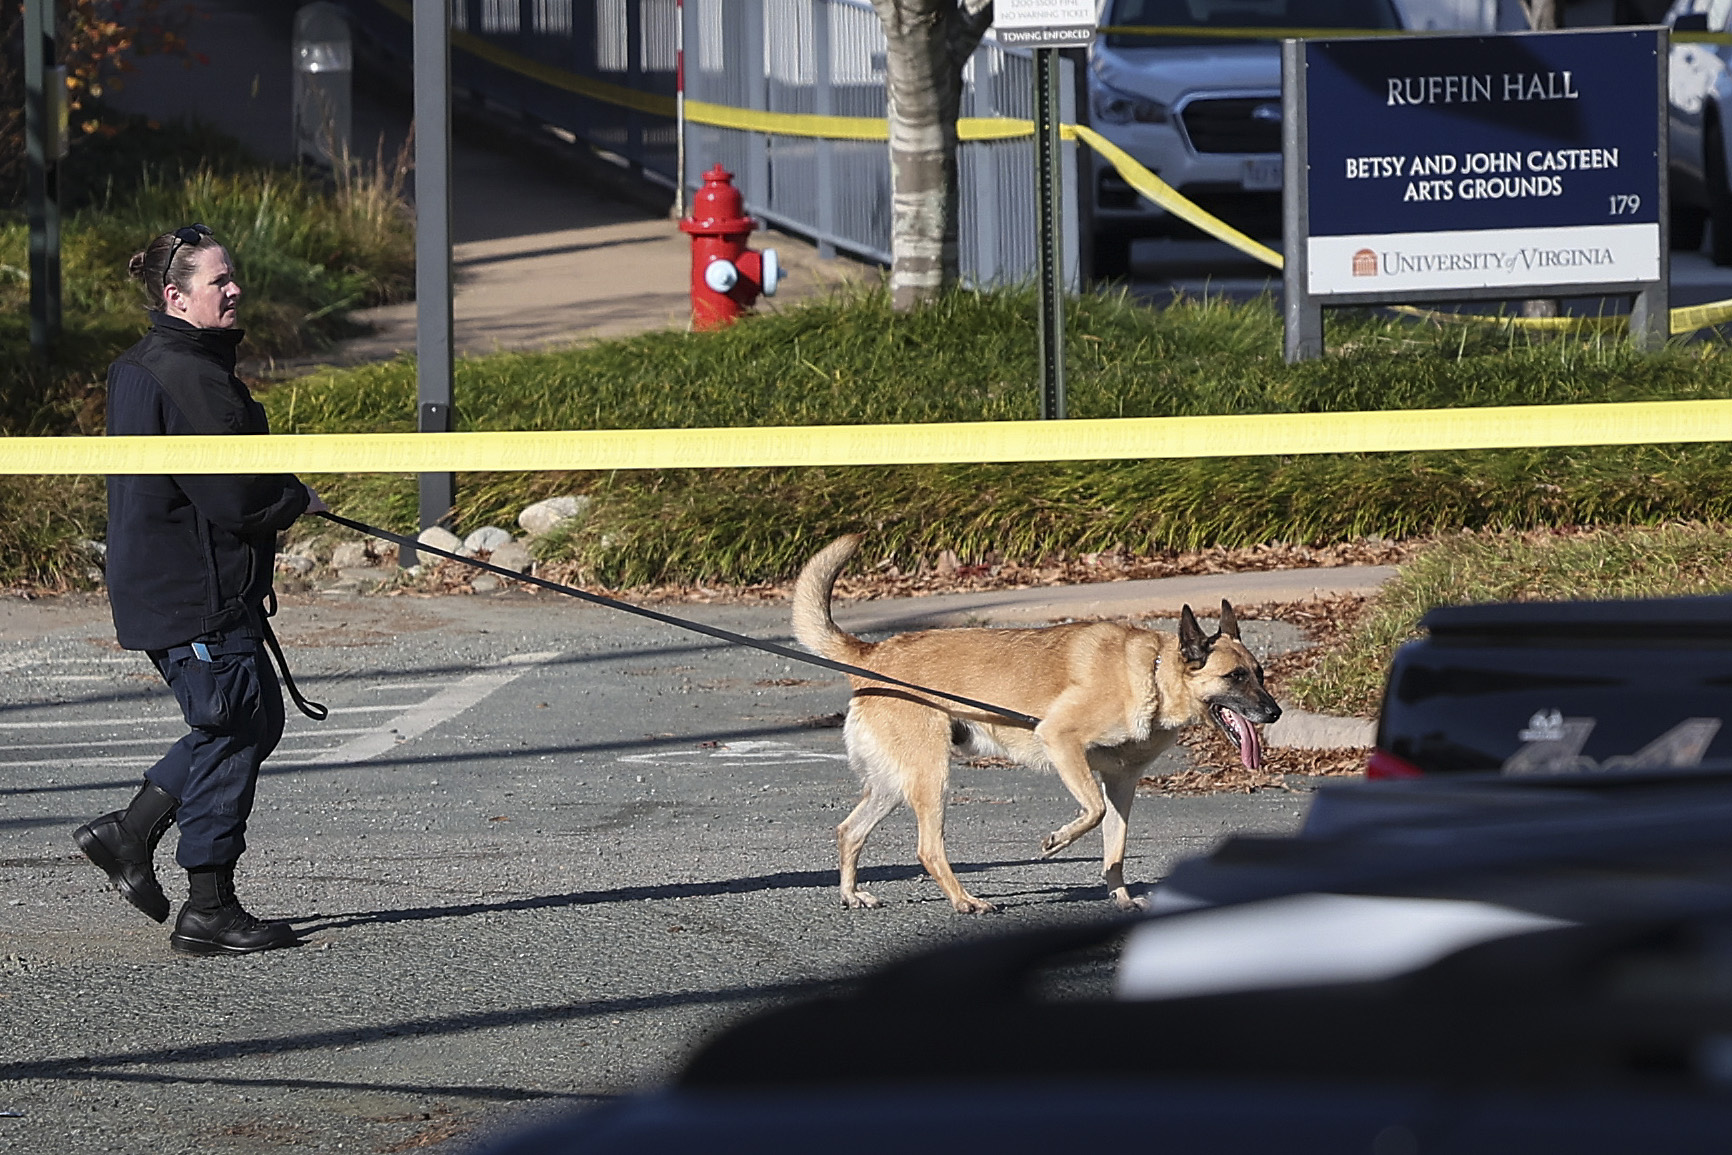 PHOTO: A law enforcement K9 team works the crime scene where 3 people were killed and 2 others wounded on the grounds of the University of Virginia, Nov. 14, 2022 in Charlottesville, Virginia.